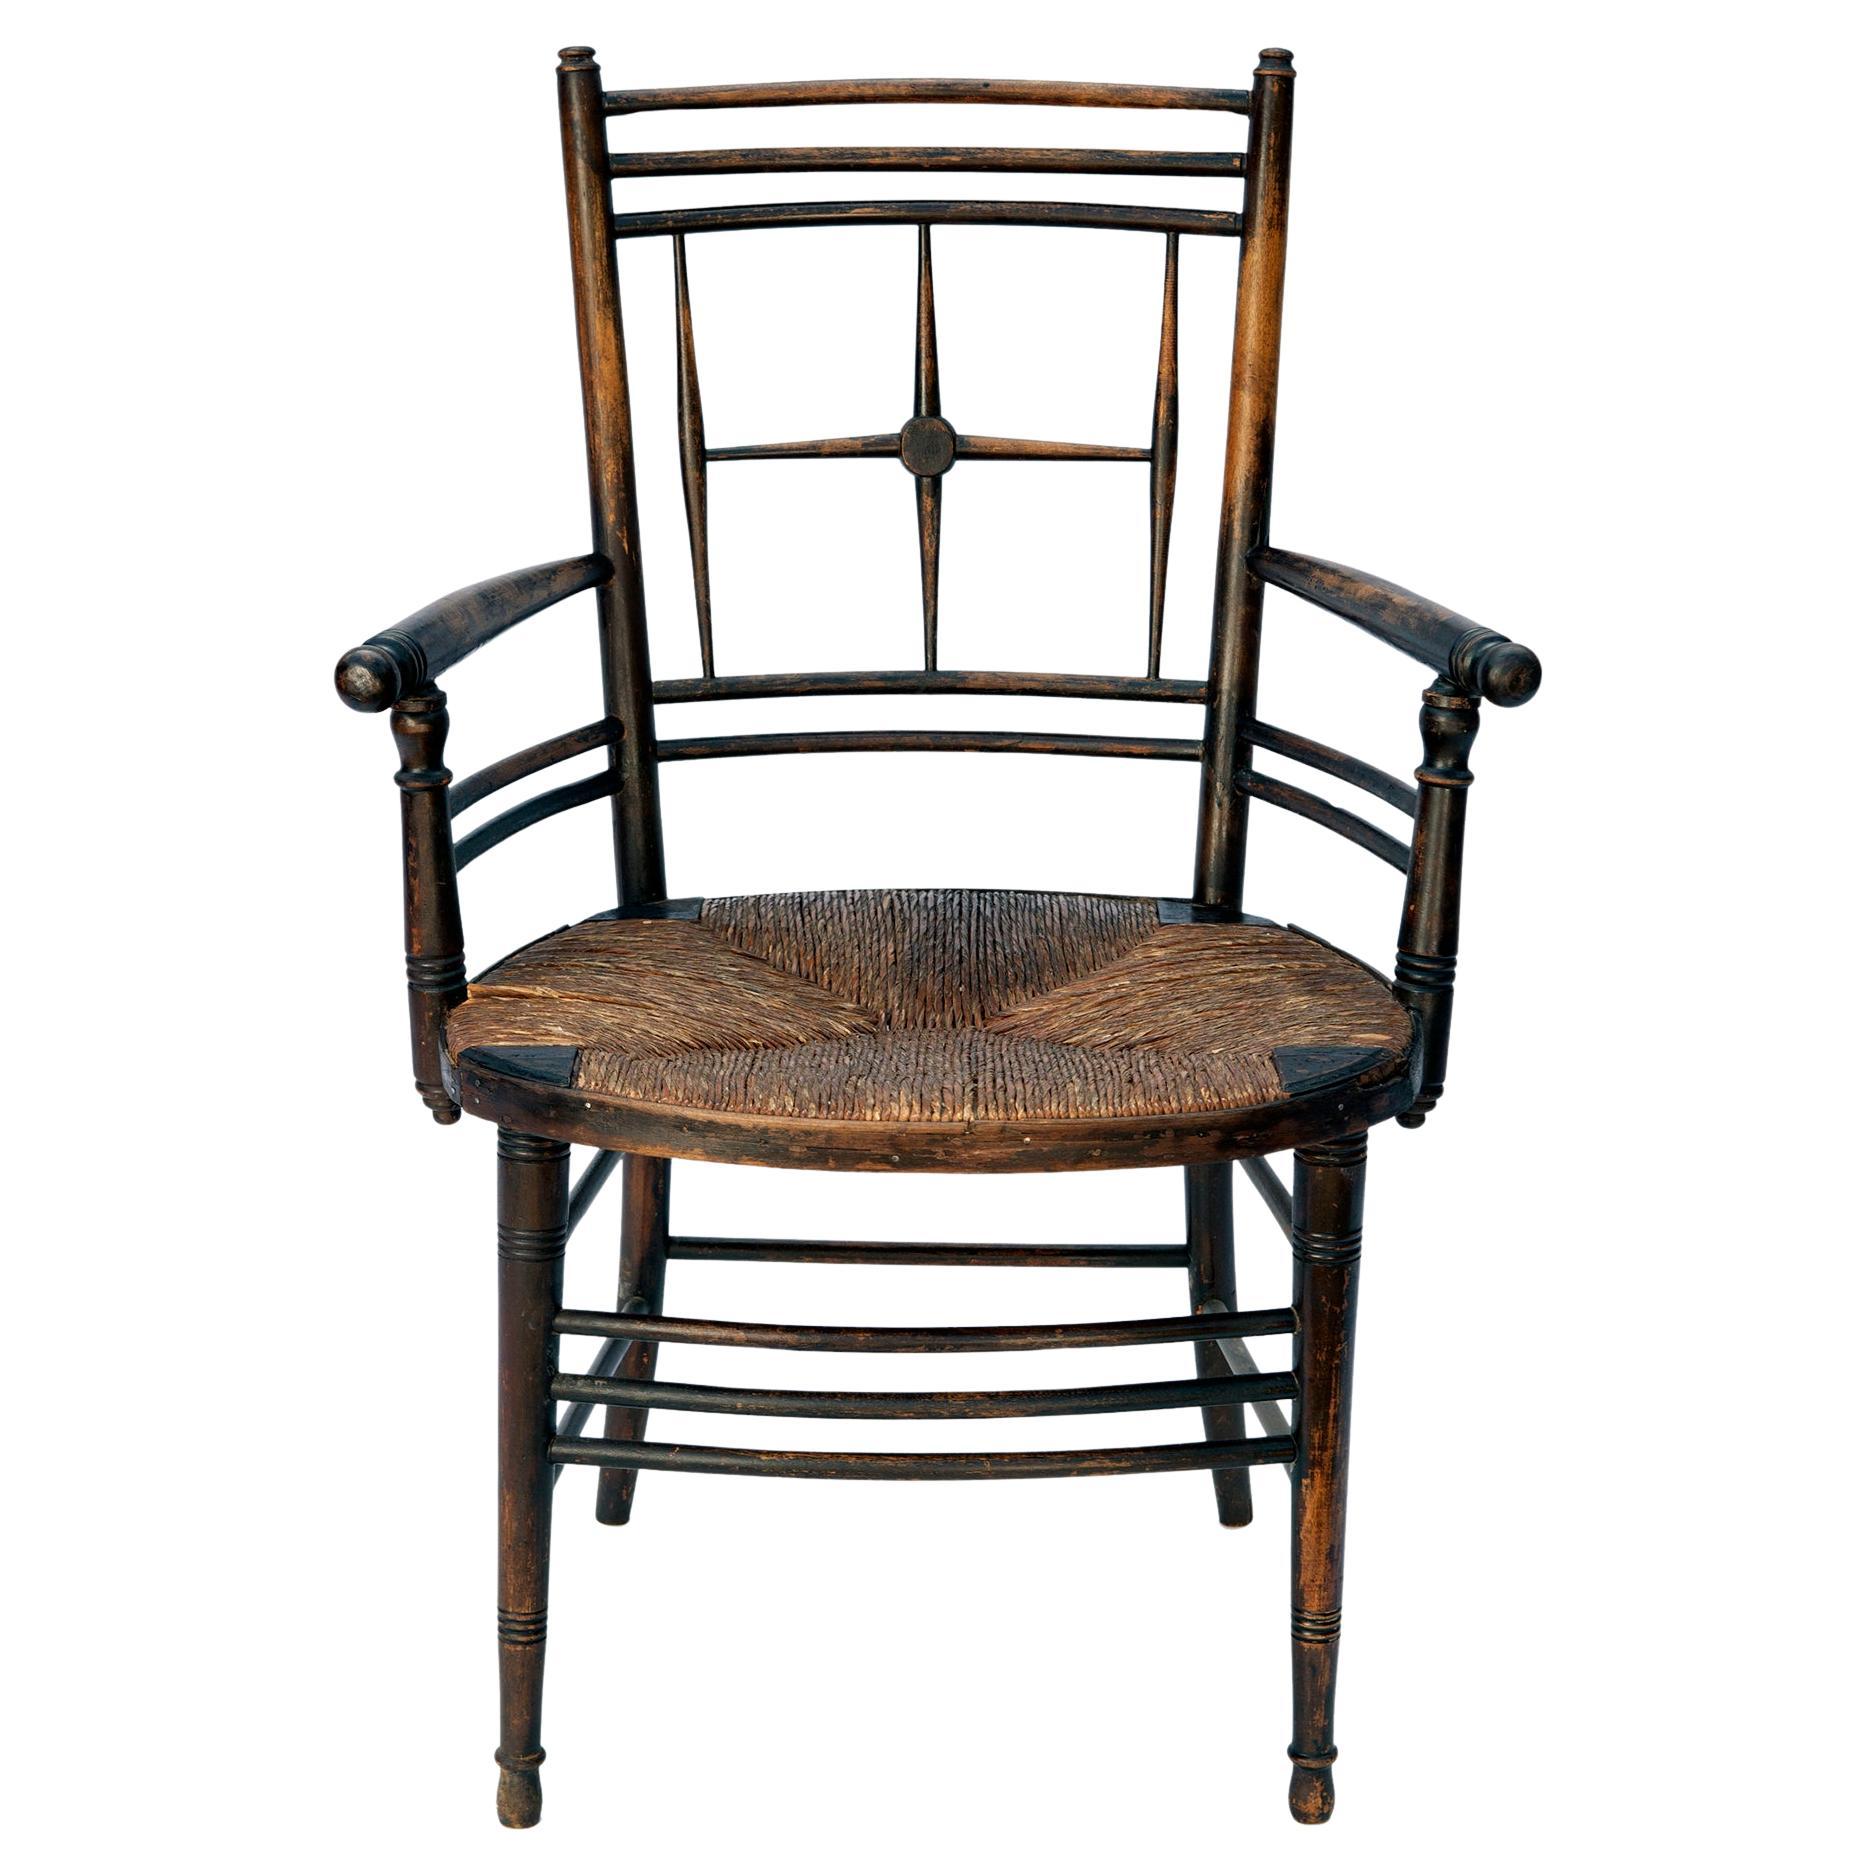 Original "Madox Chair" with Rush Seats by William Morris & Company; a pair 